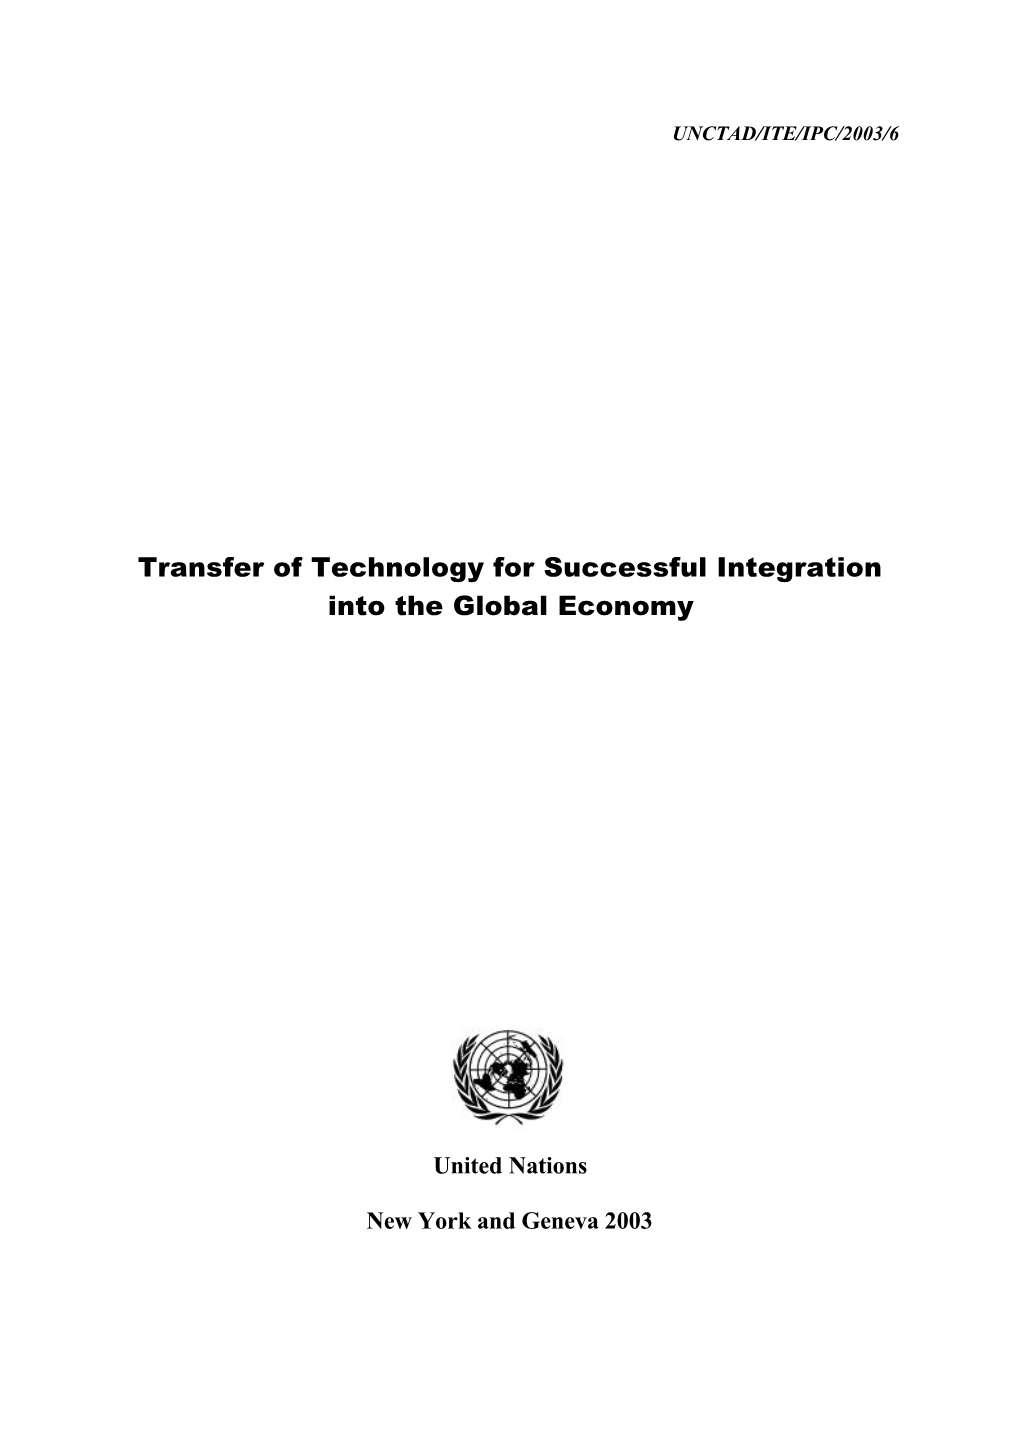 Transfer of Technology for Successful Integration Into the Global Economy